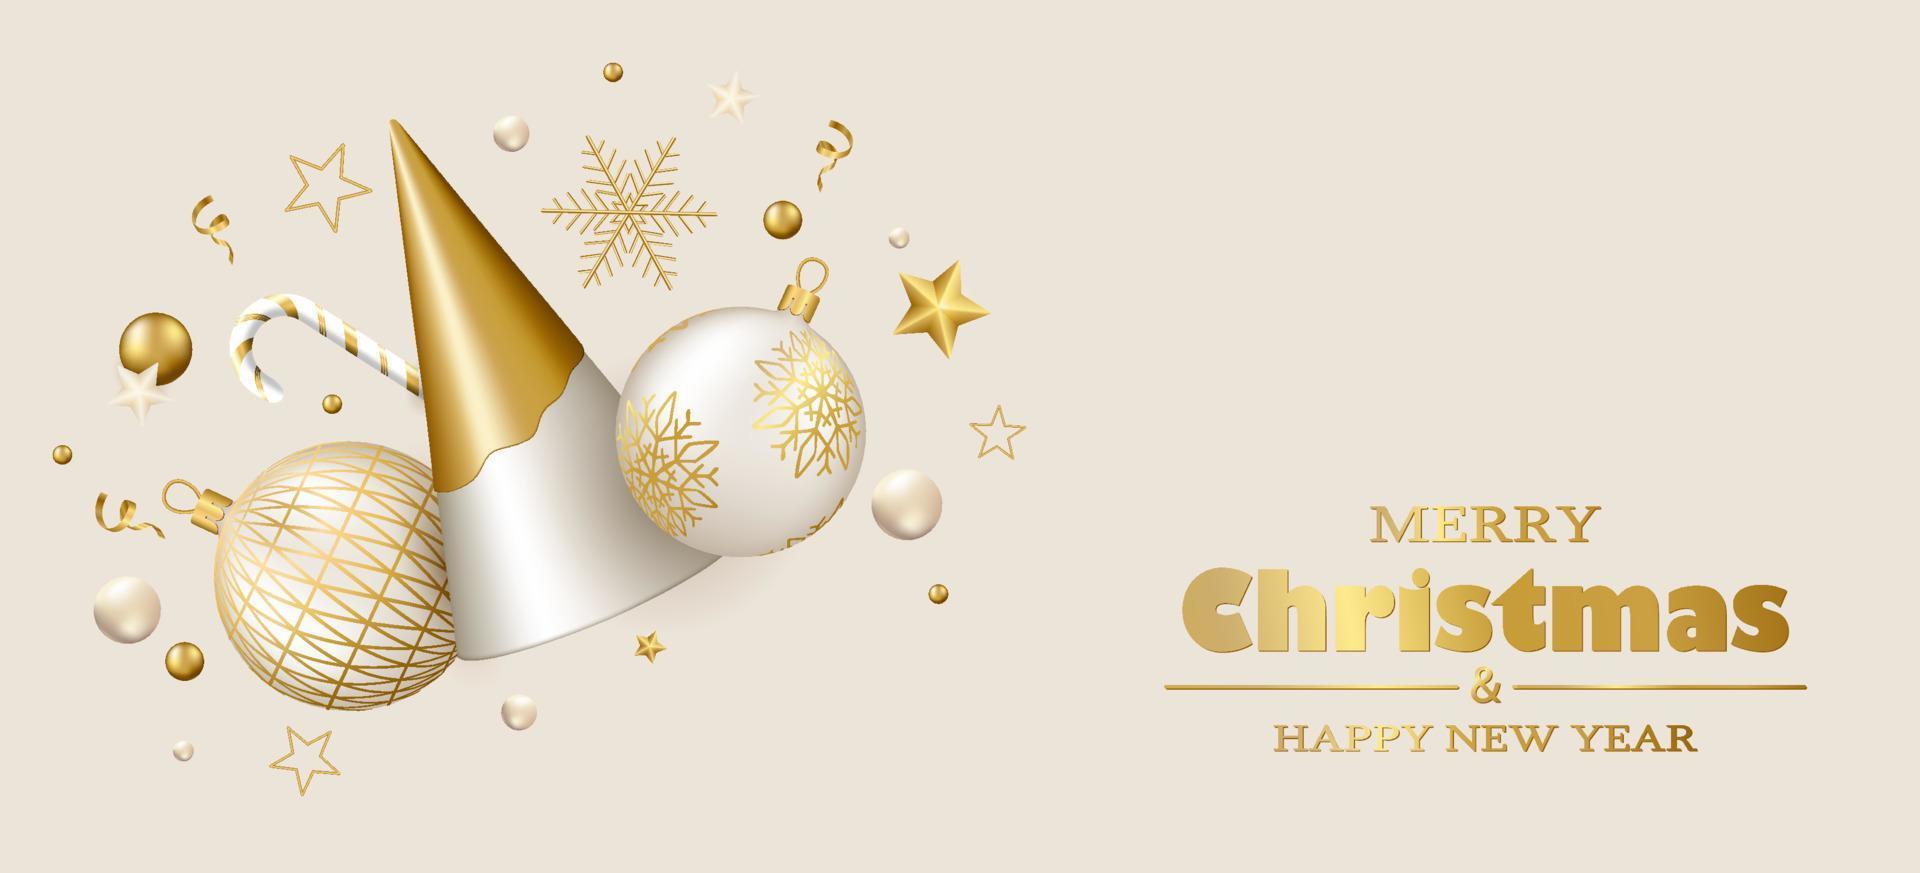 Merry Christmas and Happy New Year background. White and gold 3D Christmas tree, balls and decor. vector